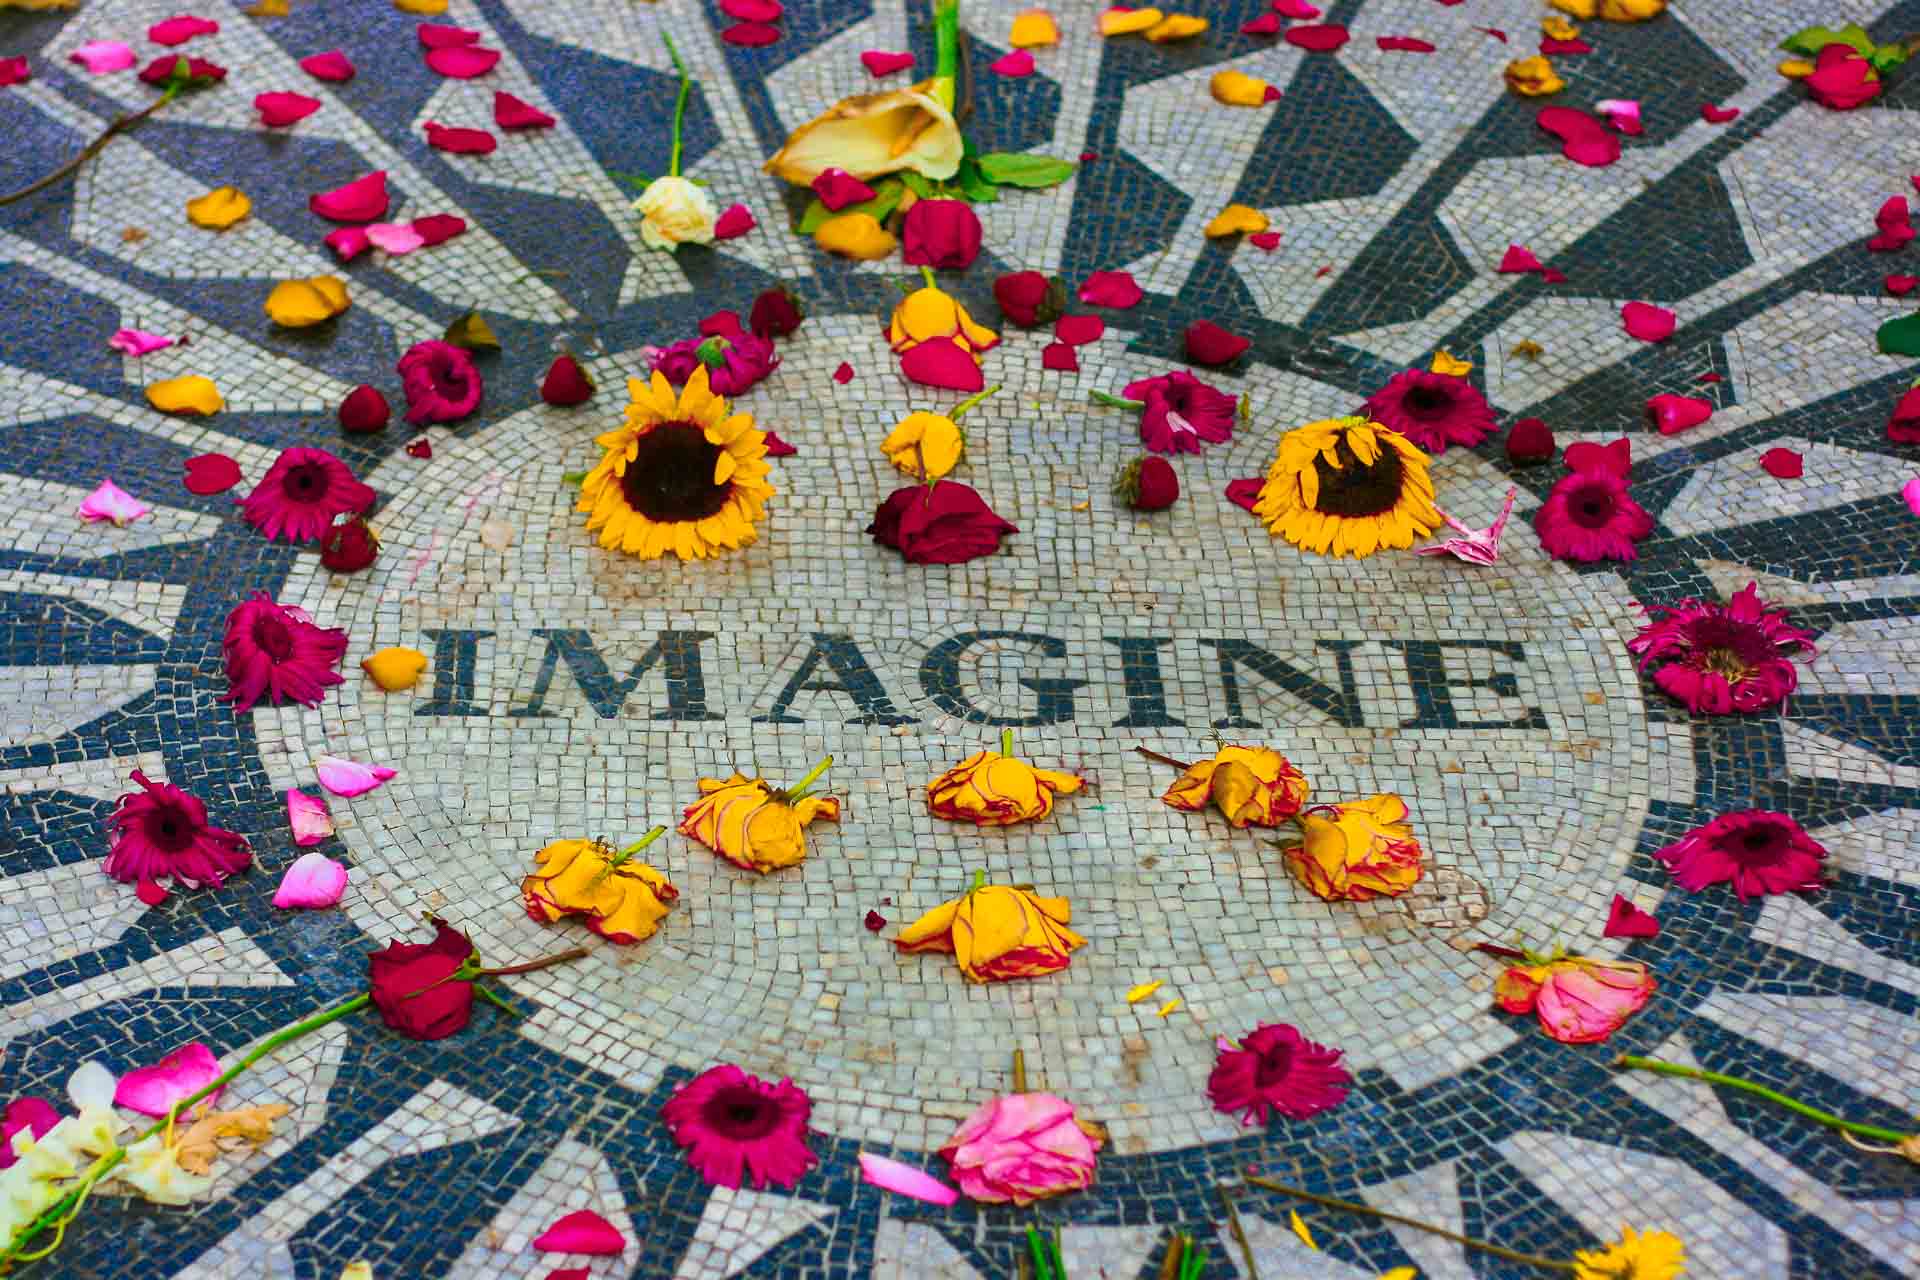 Imagine mosaic in New York City's Central Park